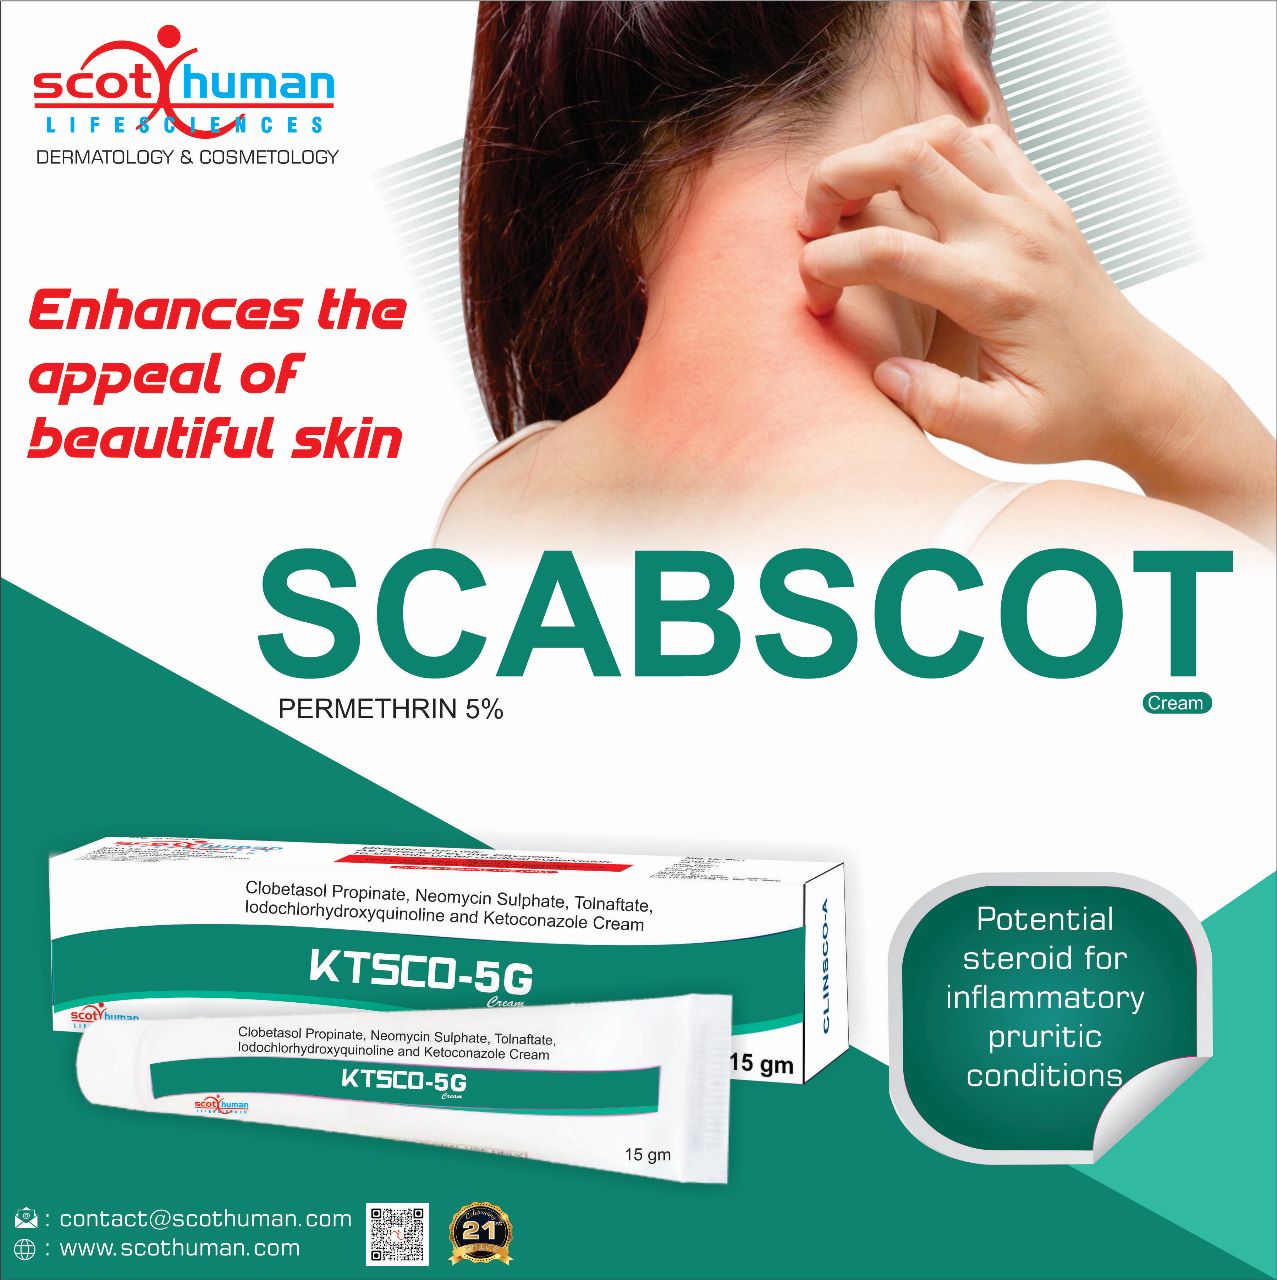 Product Name: Scabscot, Compositions of Scabscot are Clobestol propionate,Neomycin sulphate,ketoconazole,Iodochlorhydroxyquinione,Tolnaftate - Pharma Drugs and Chemicals